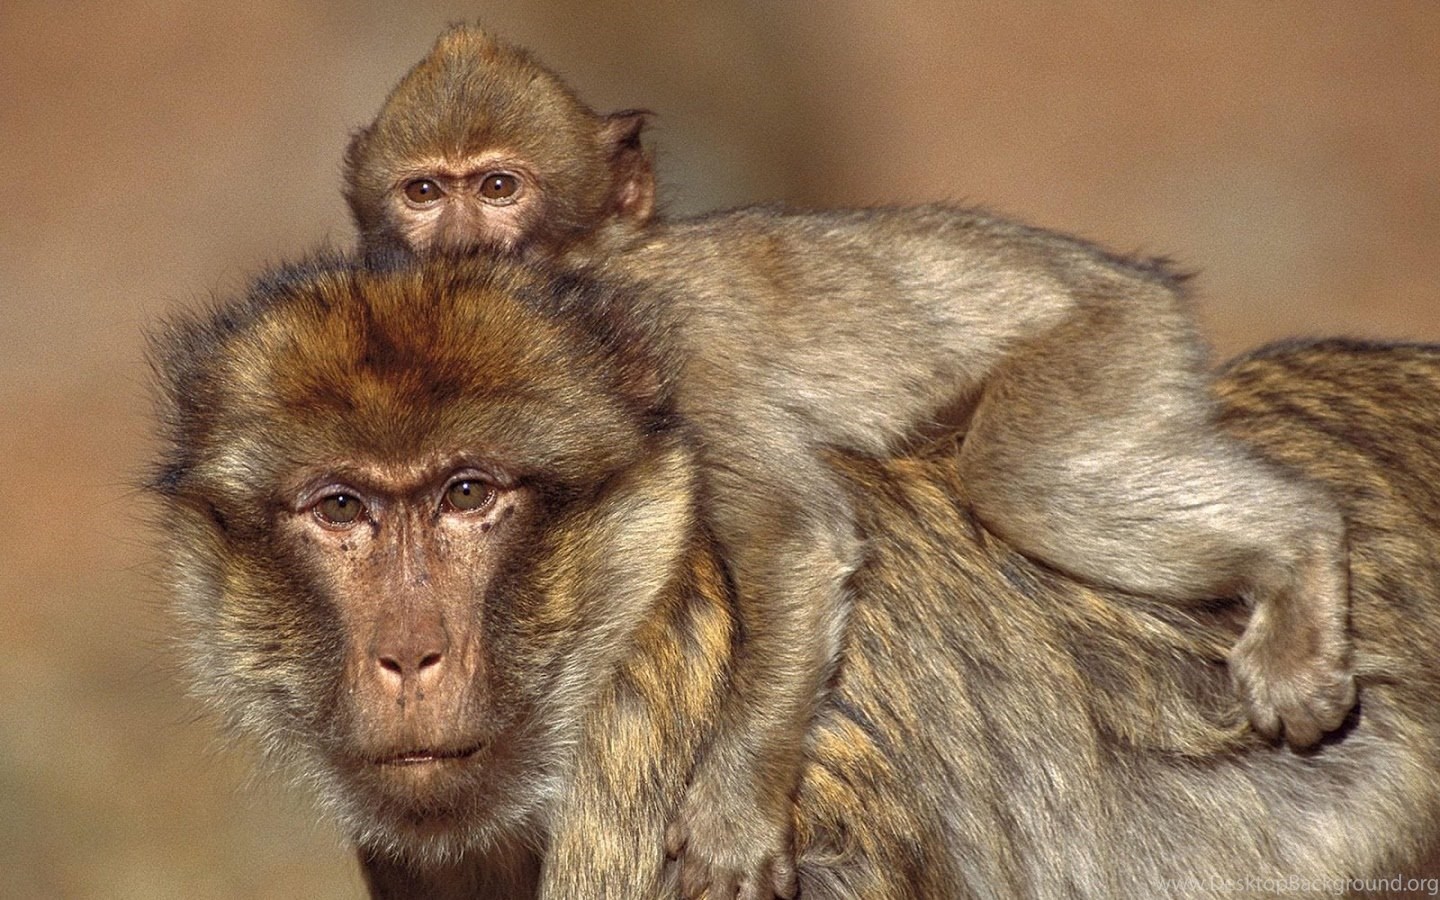 Monkey Live Wallpaper - Animal Dads National Geographic - HD Wallpaper 